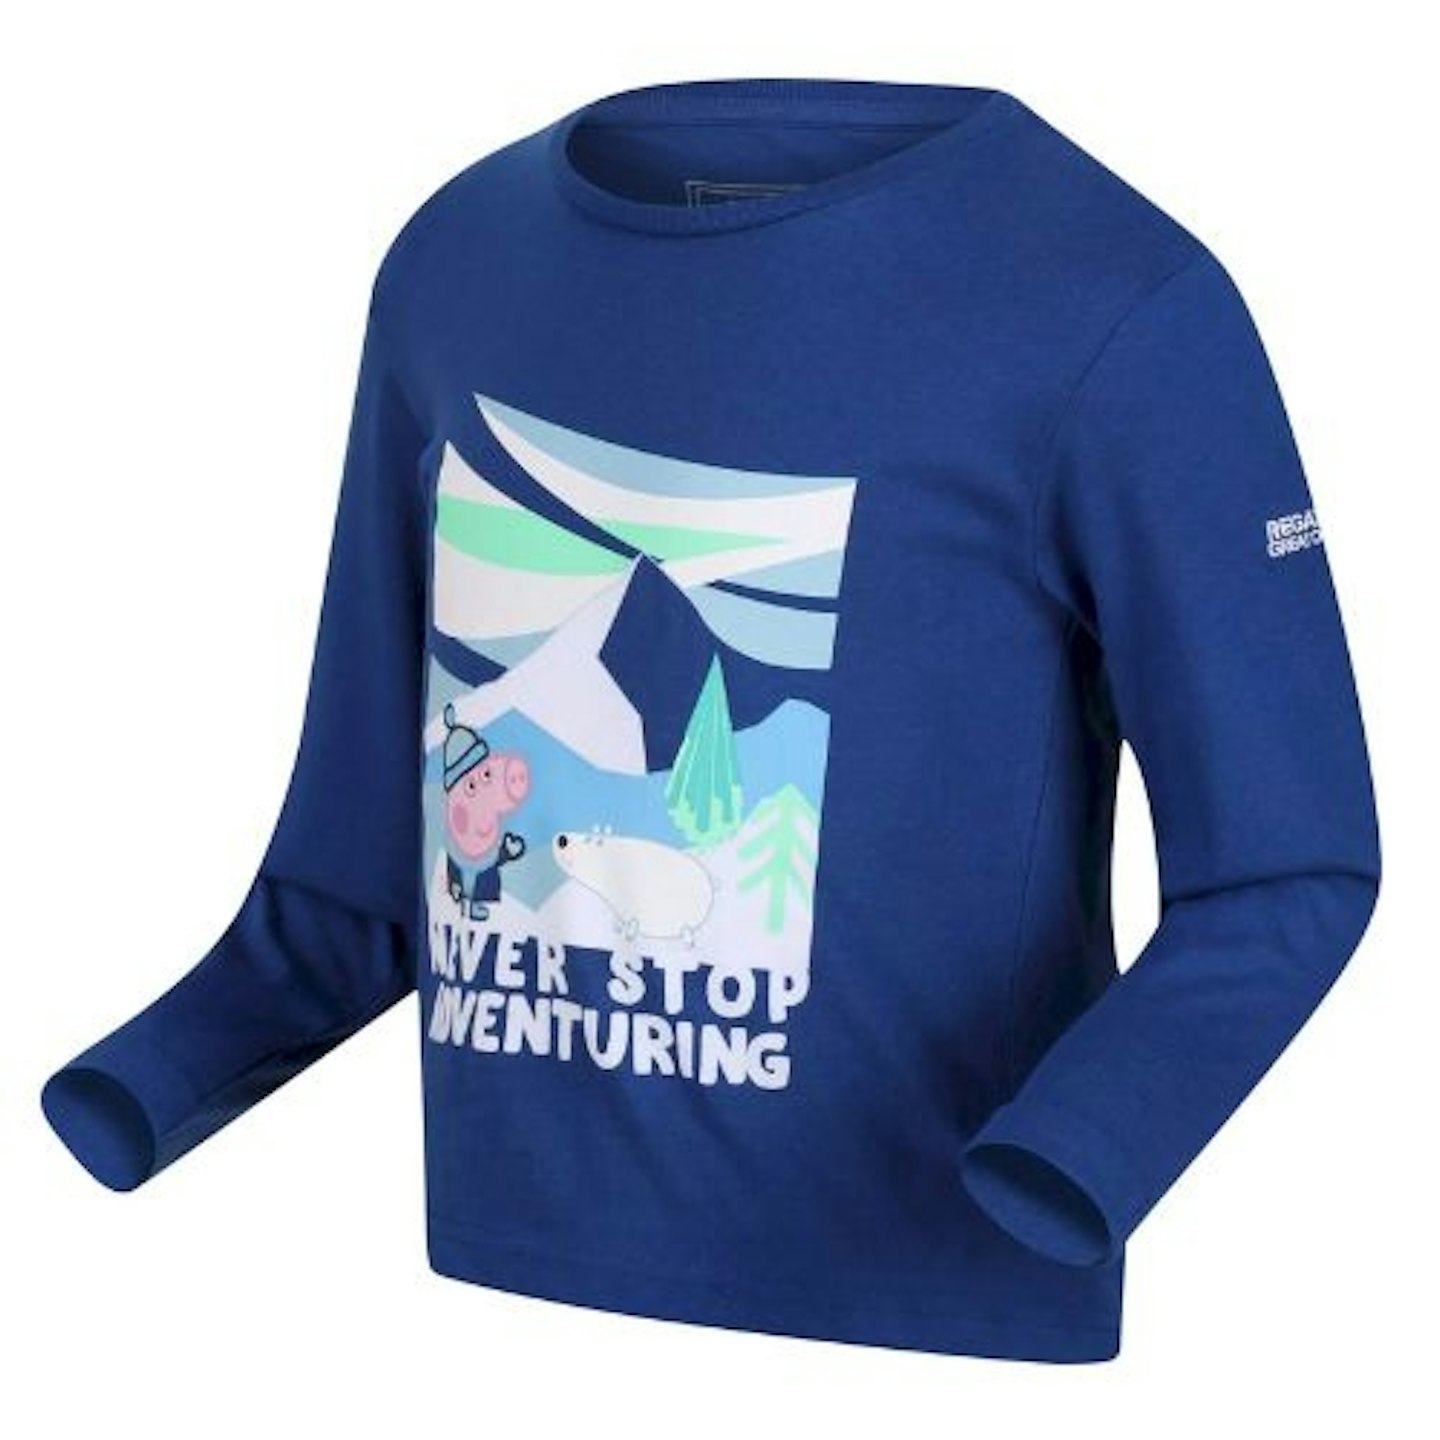 Peppa Pig Long Sleeved Graphic T-Shirt, Space Blue